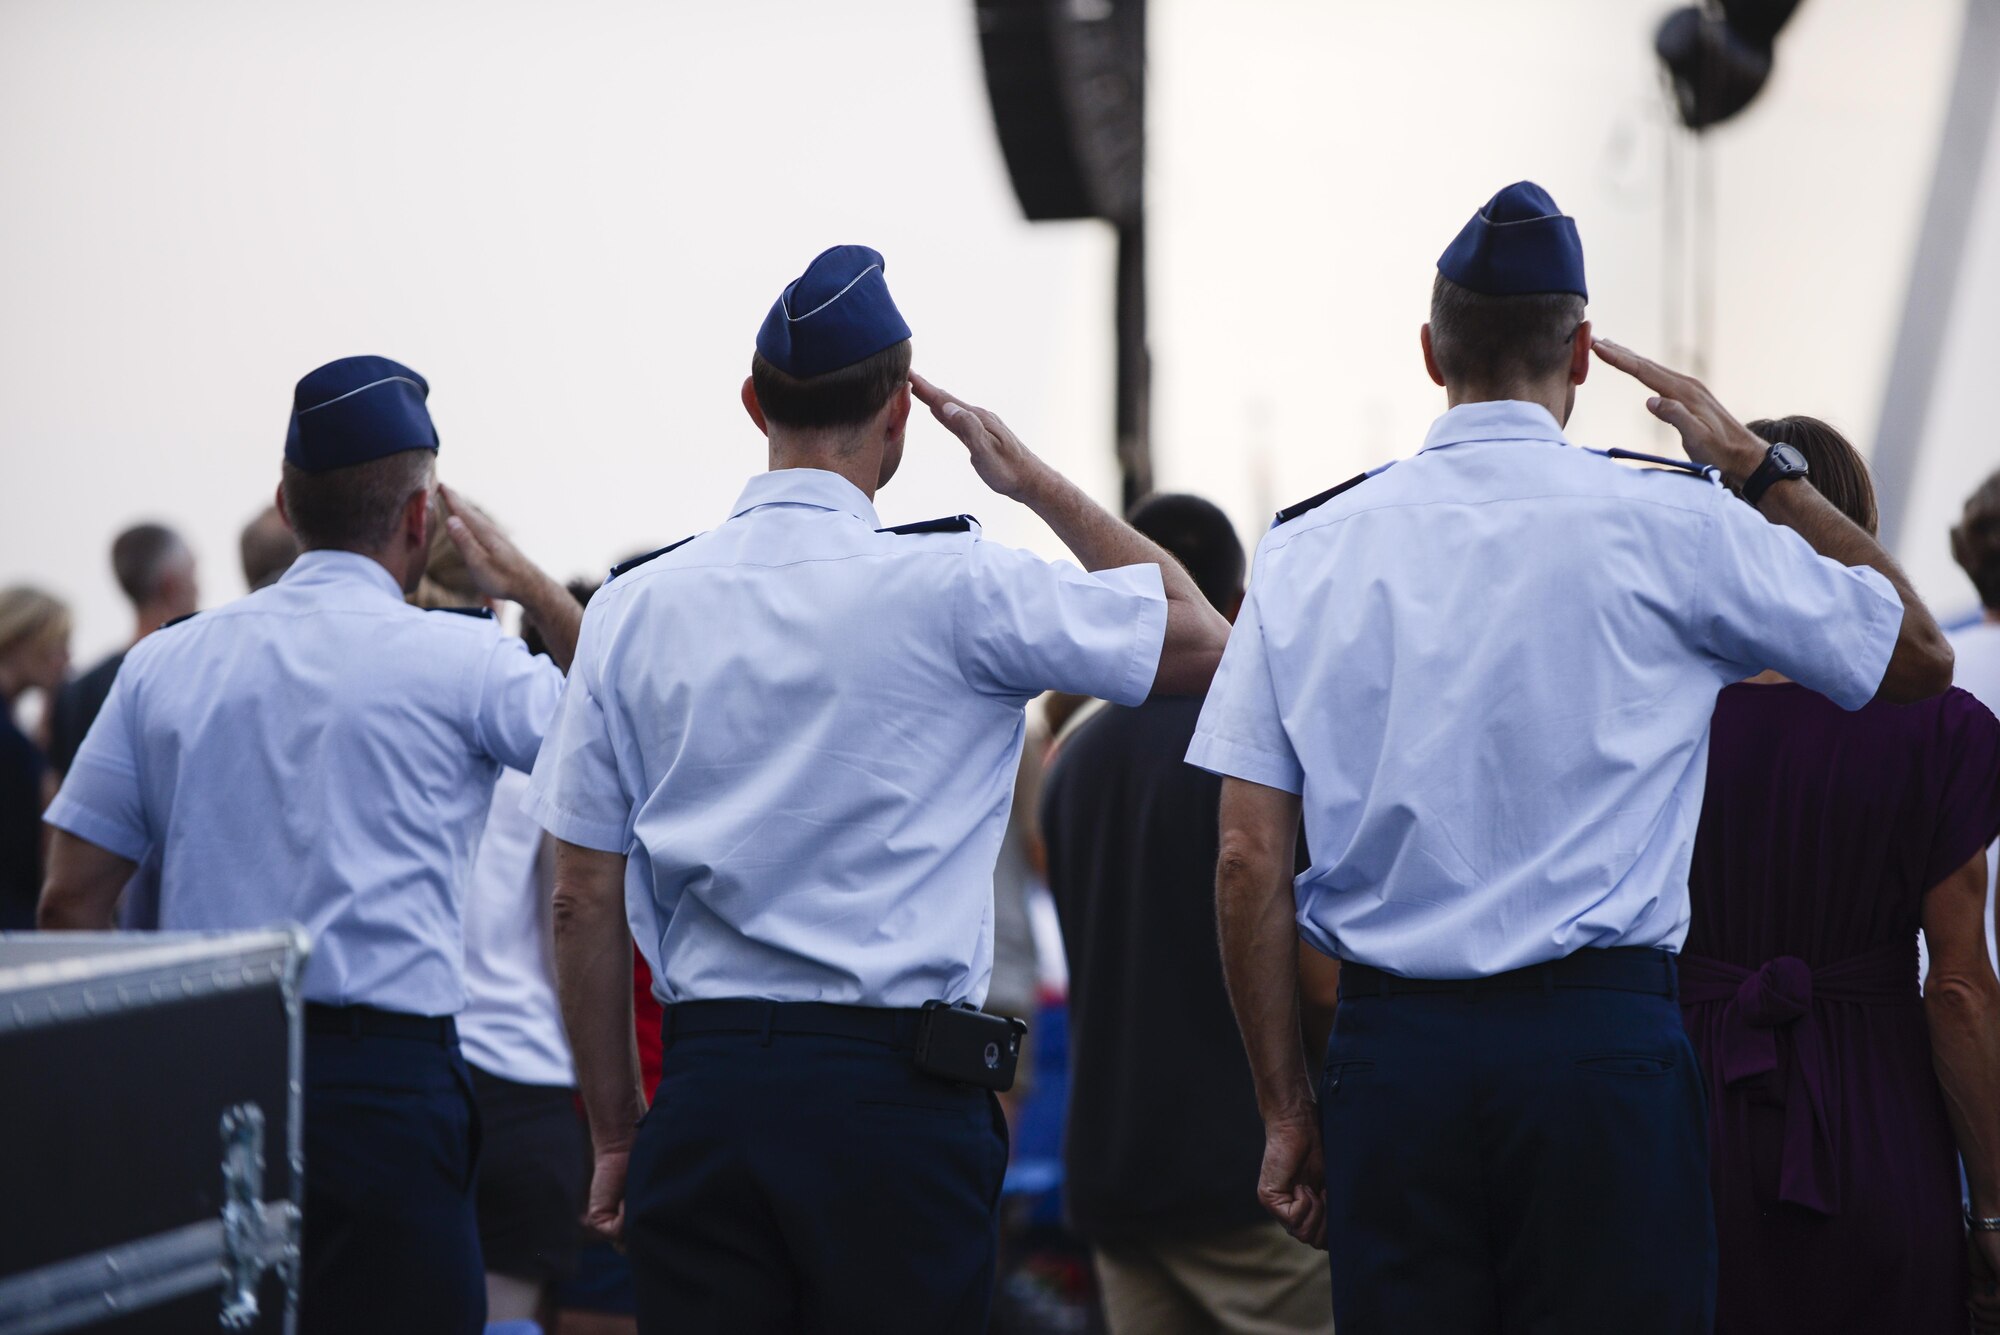 Airmen salute as the colors are presented during a wreath-laying ceremony commemorating the 70th anniversary of the end of World War II at the Air Force Memorial in Arlington, Va., Aug. 14, 2015.  (Air Force photo/Tech. Sgt. Joshua L. DeMotts)